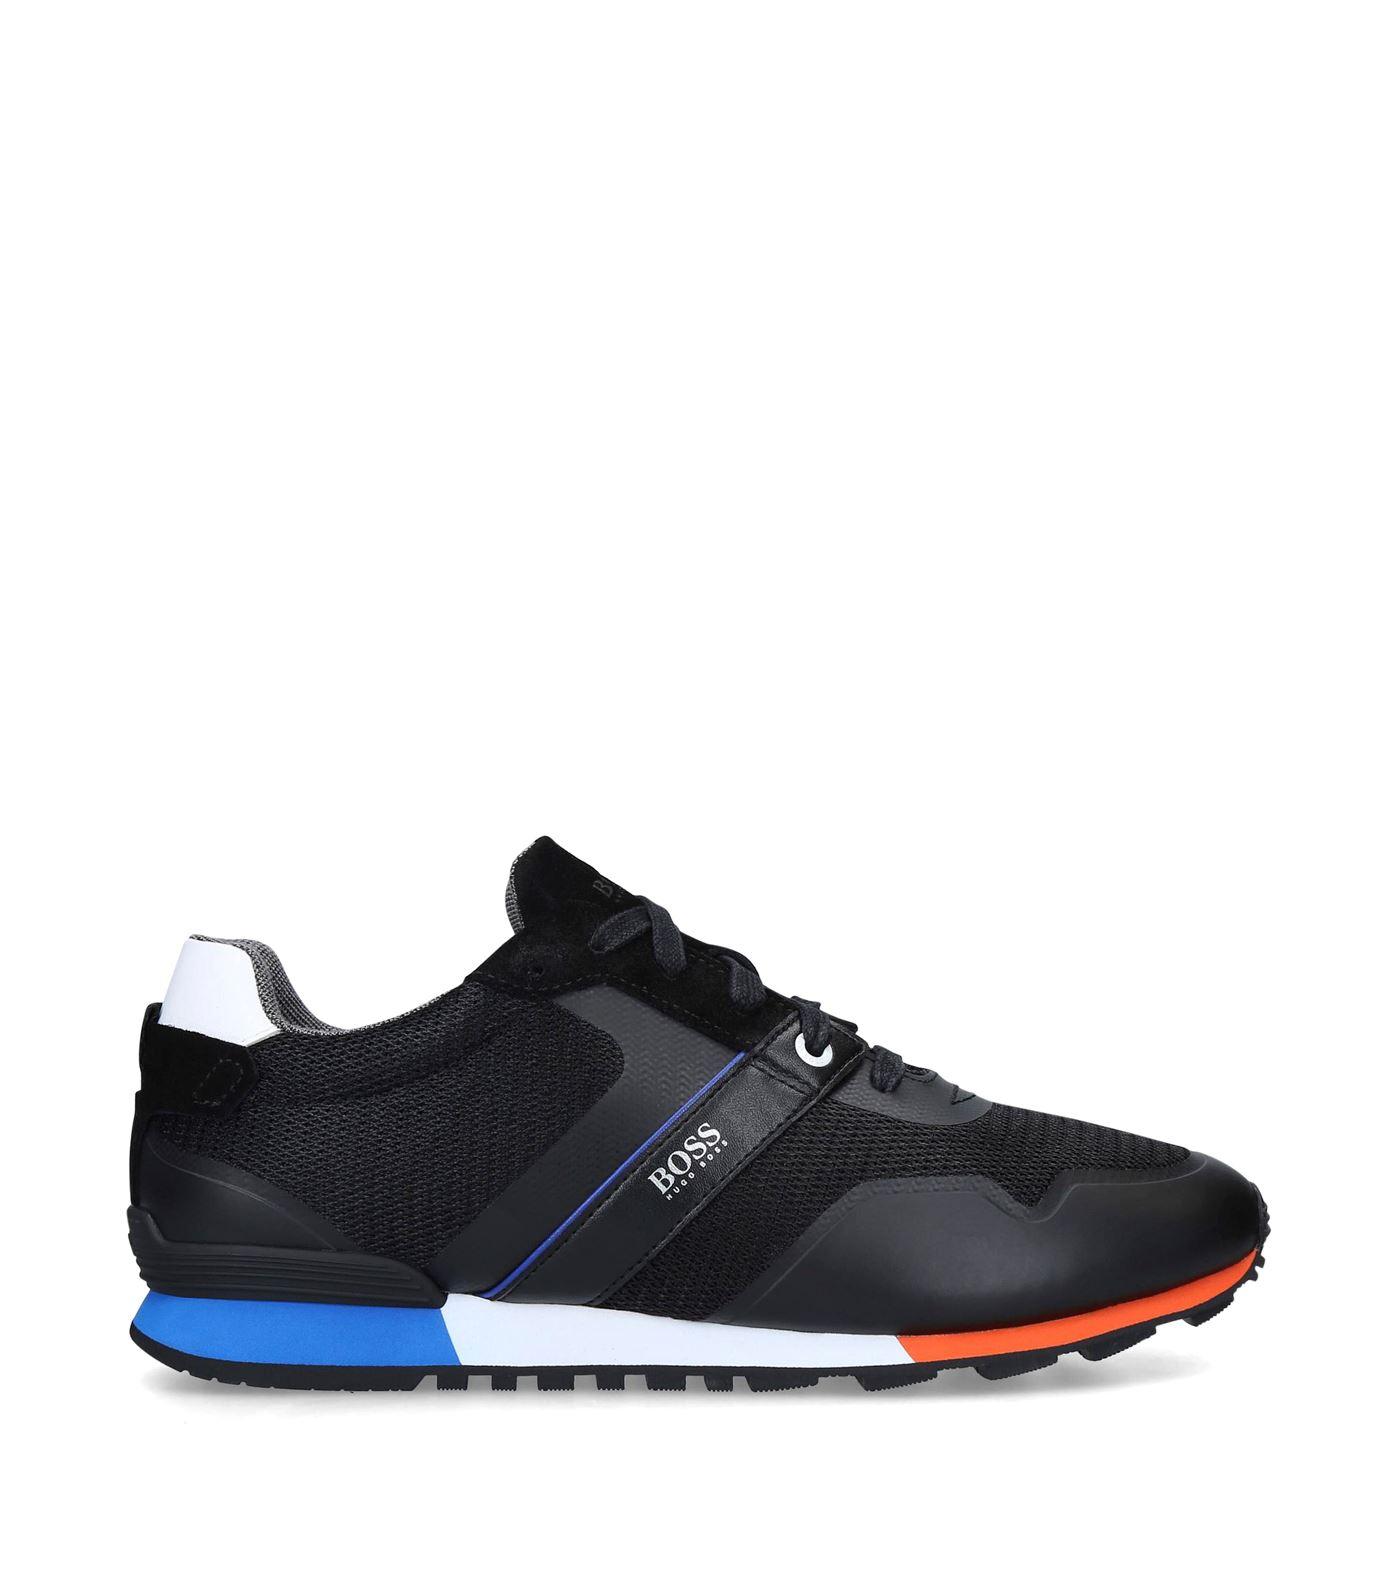 BOSS Rubber Parkour Runner Trainers in Blue for Men - Lyst